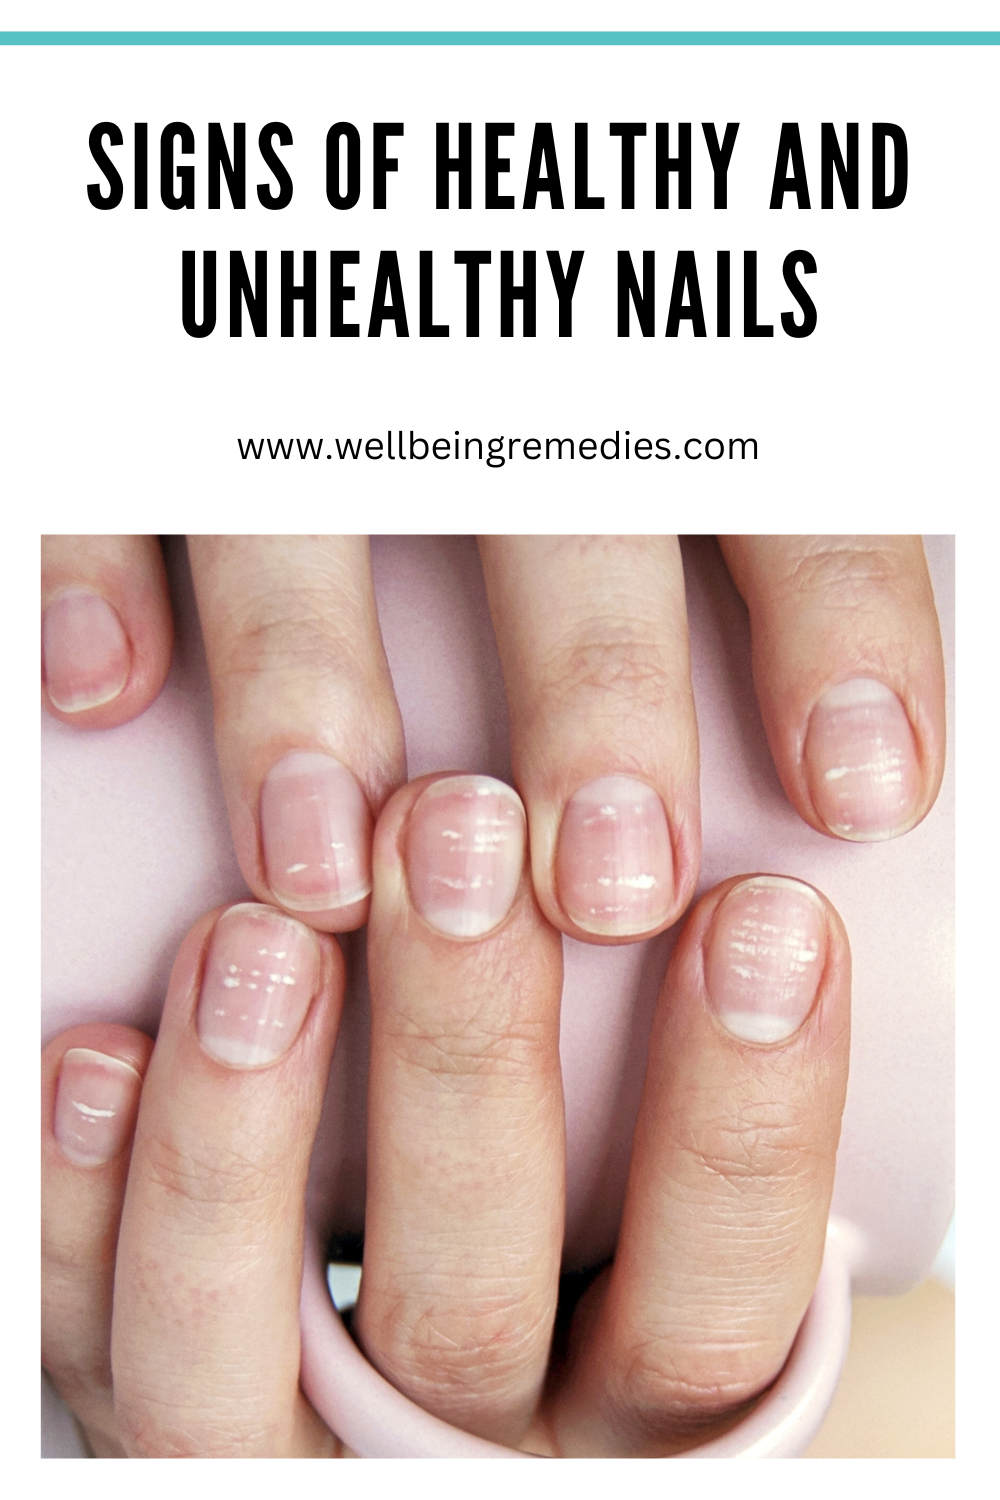 Signs of Healthy and Unhealthy Nails